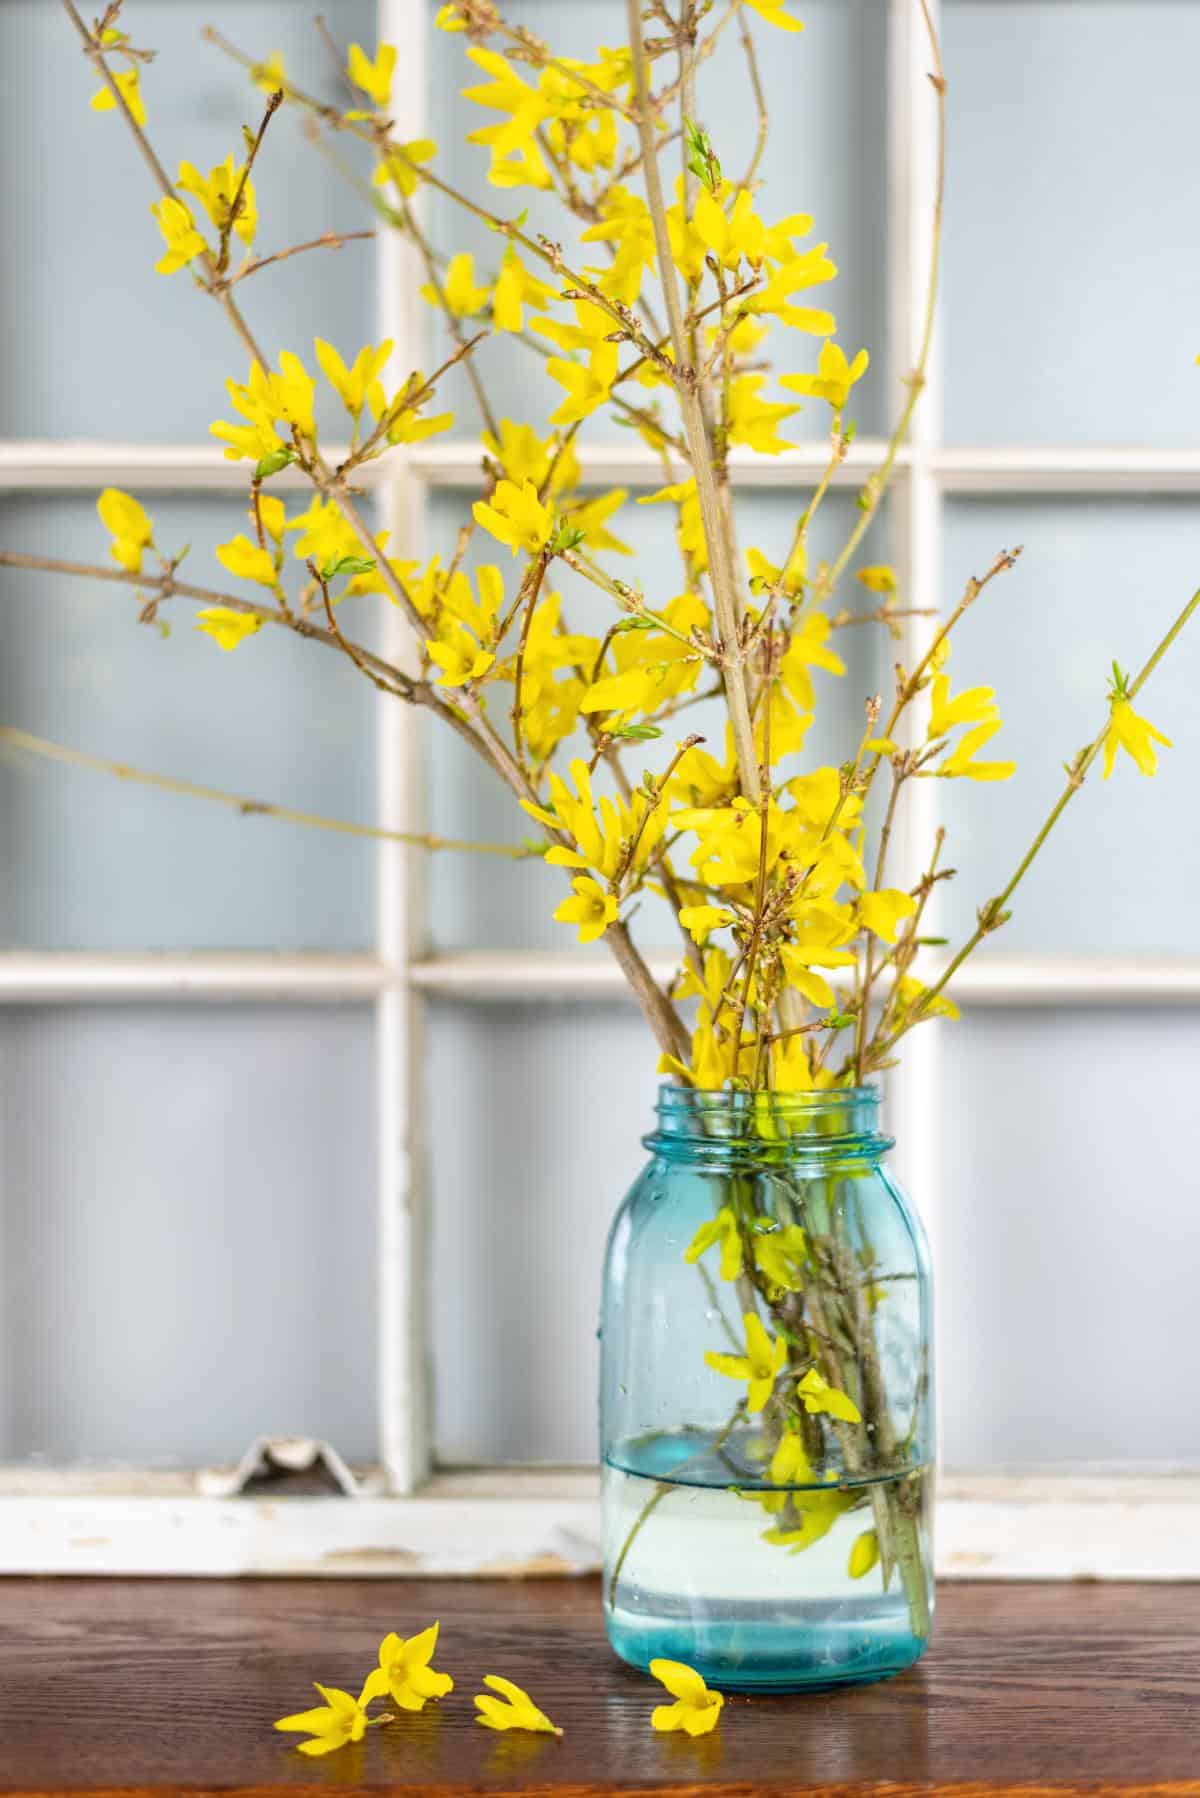 Forced cuttings of forsythia